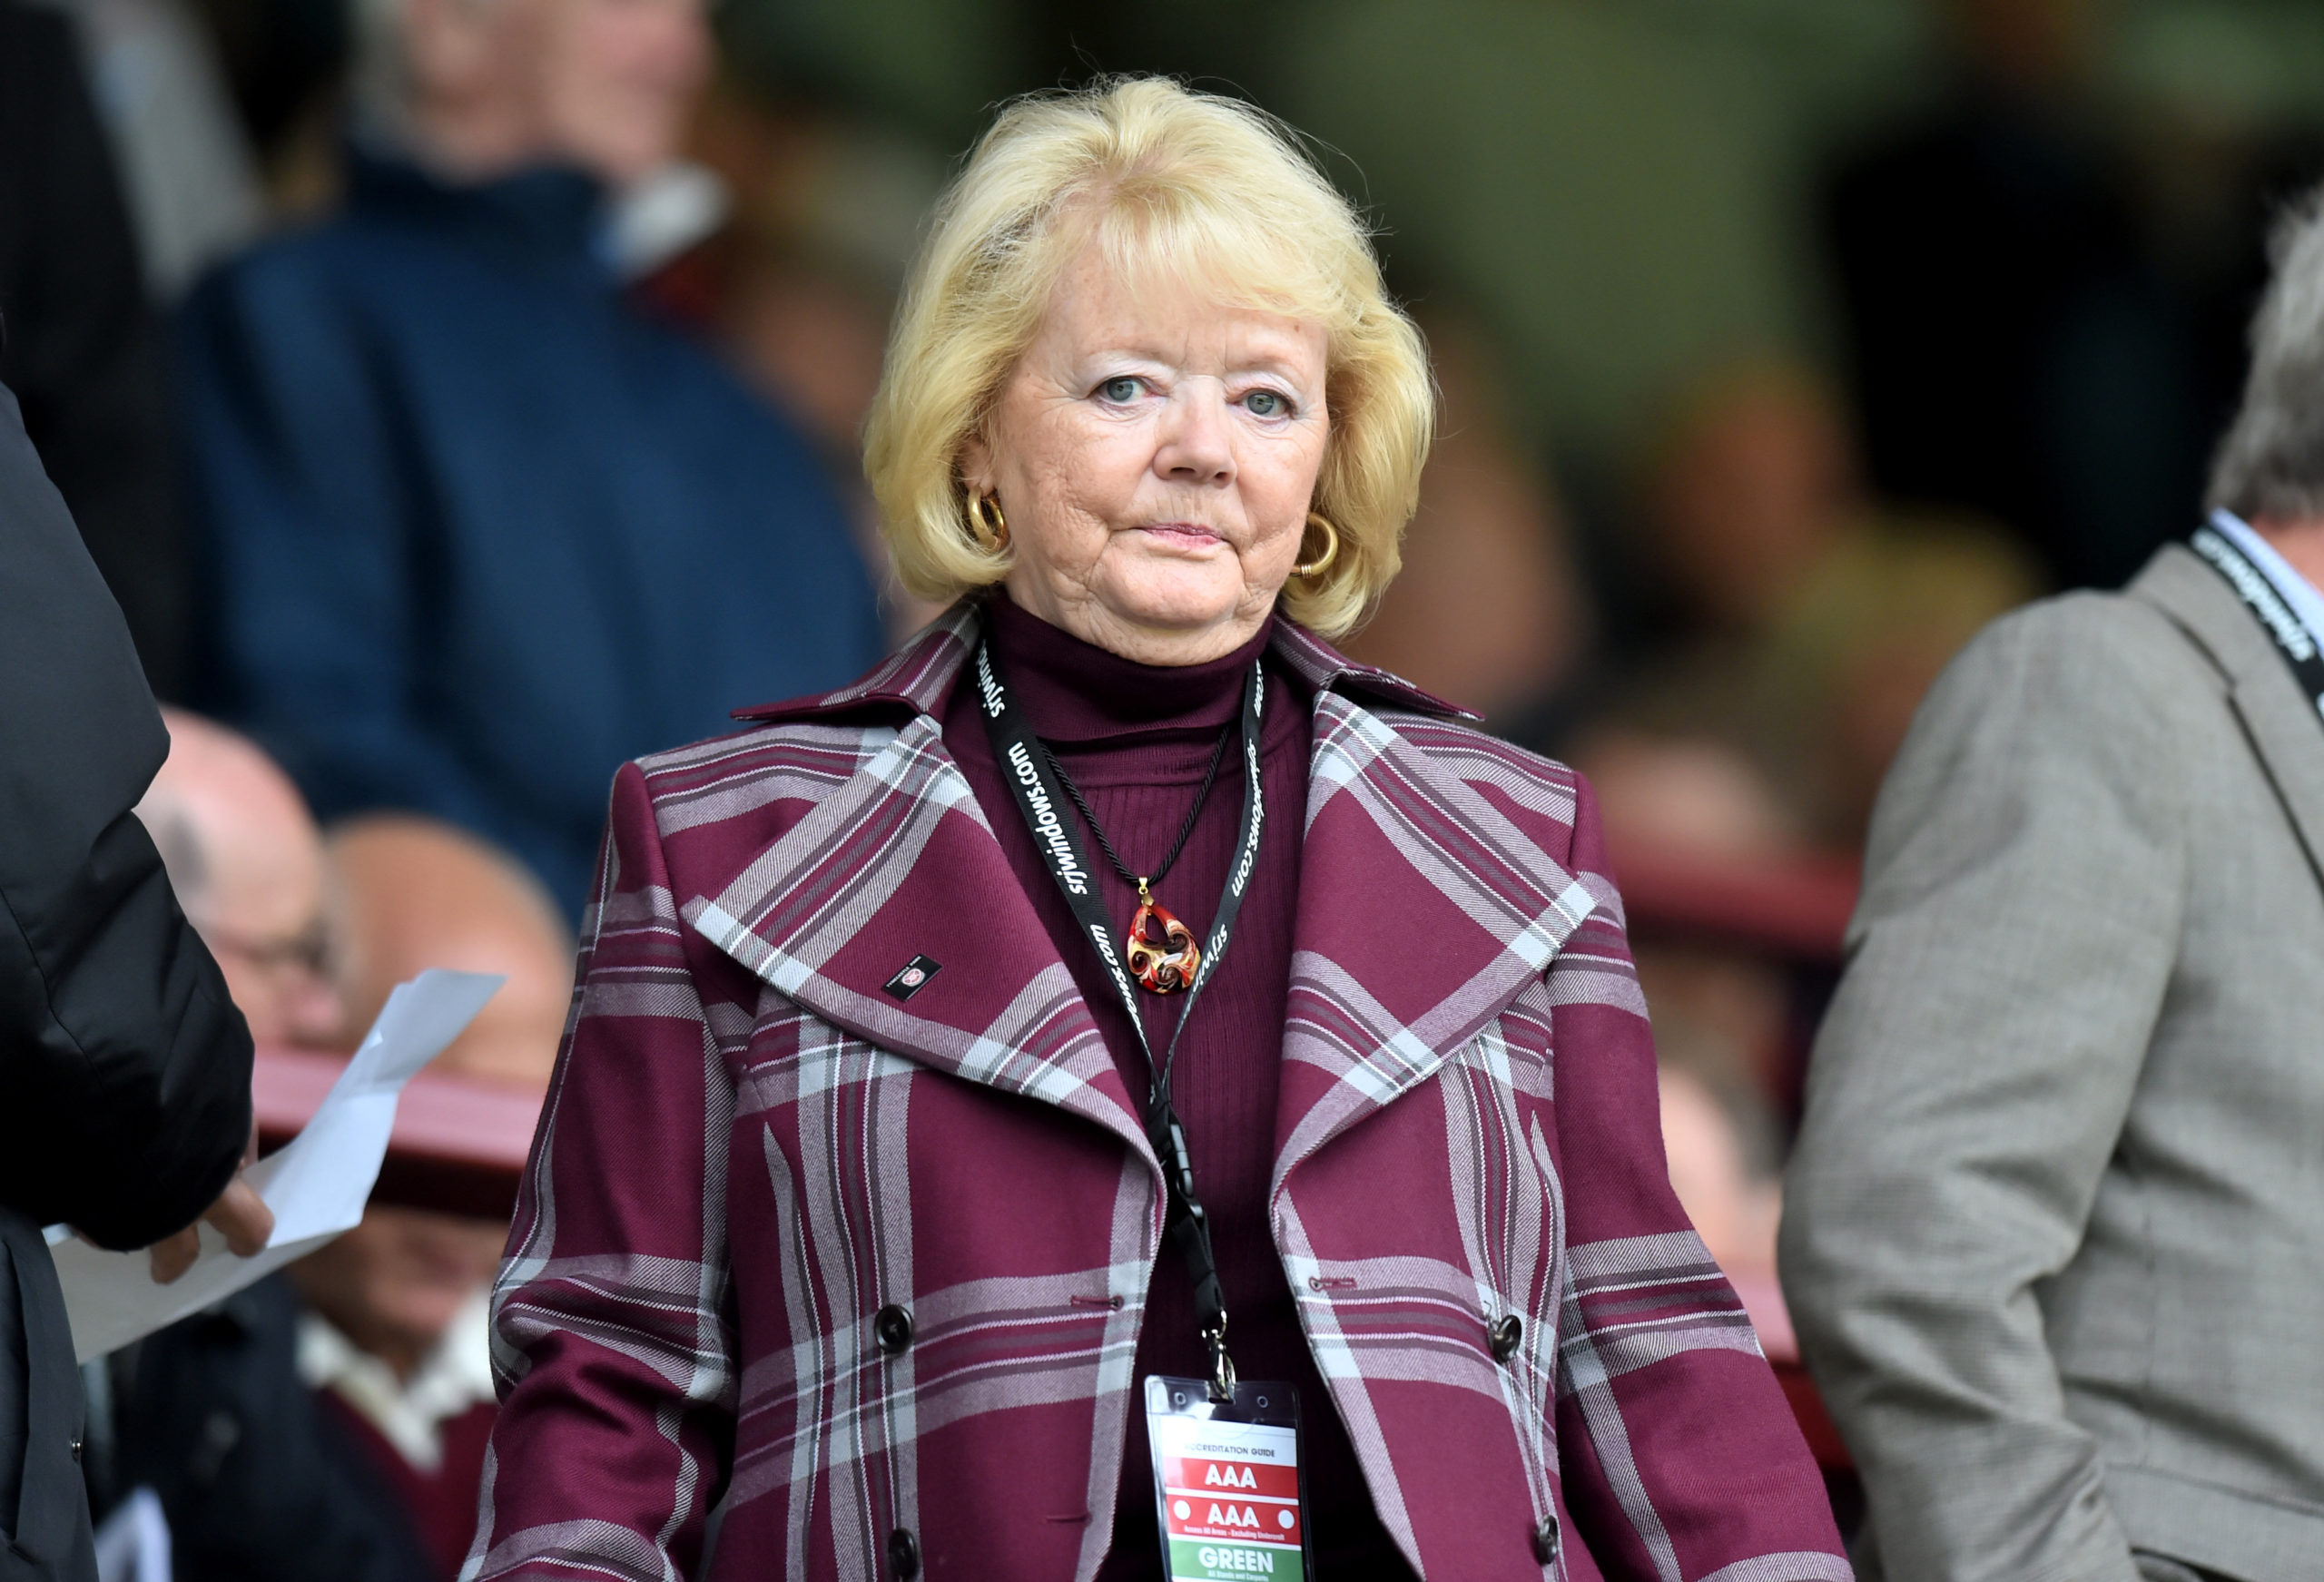 Hearts owner Anne Budge